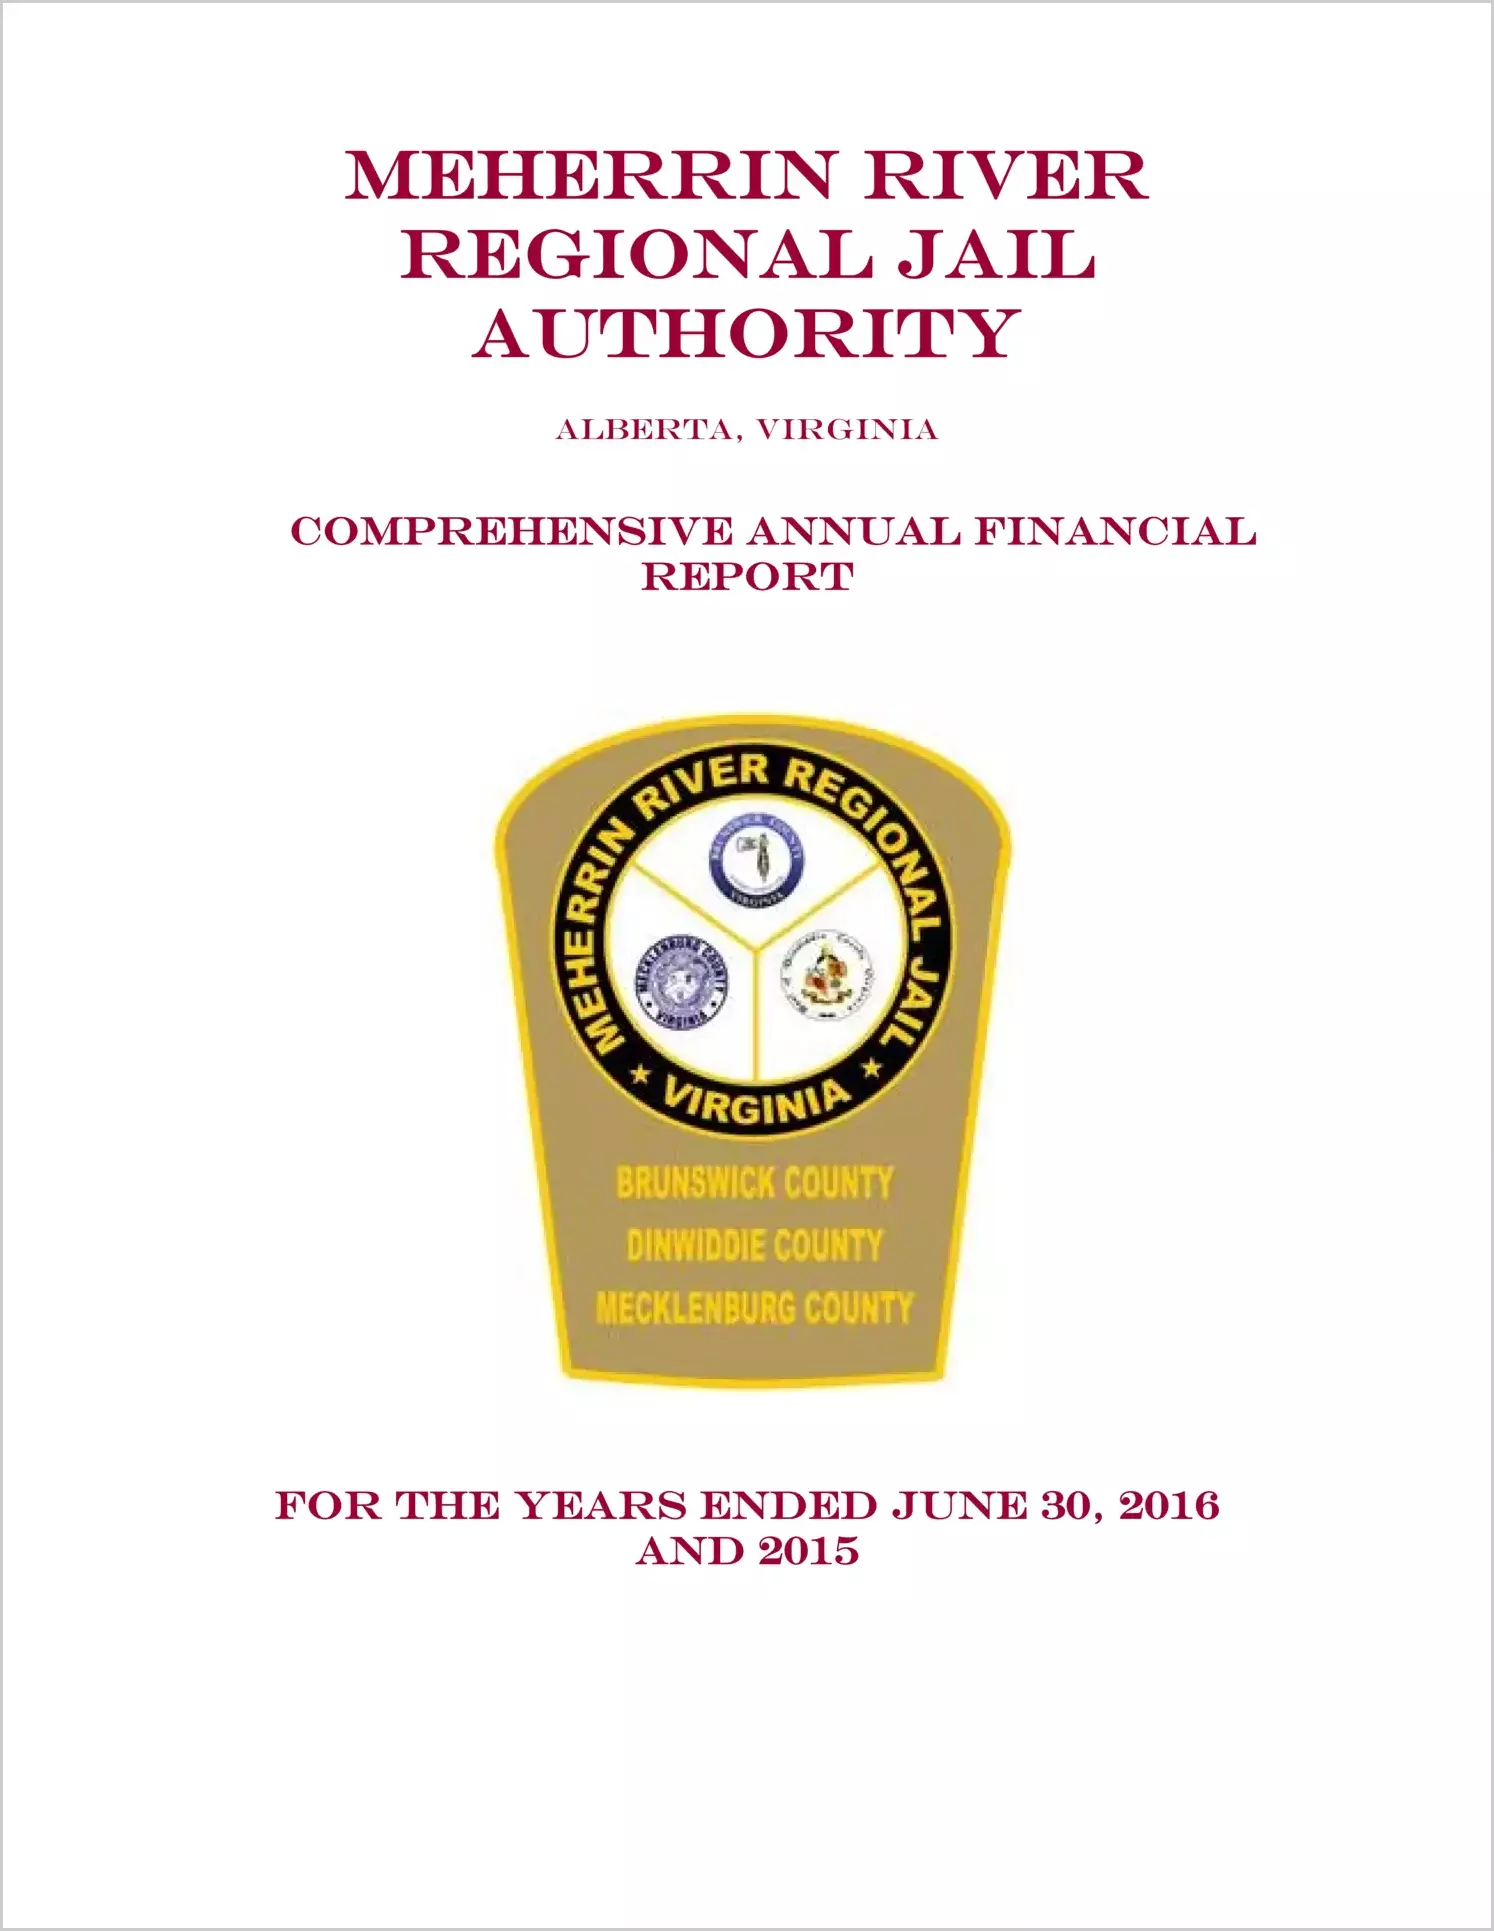 2016 ABC/Other Annual Financial Report  for Meherrin River Regional Jail Authority